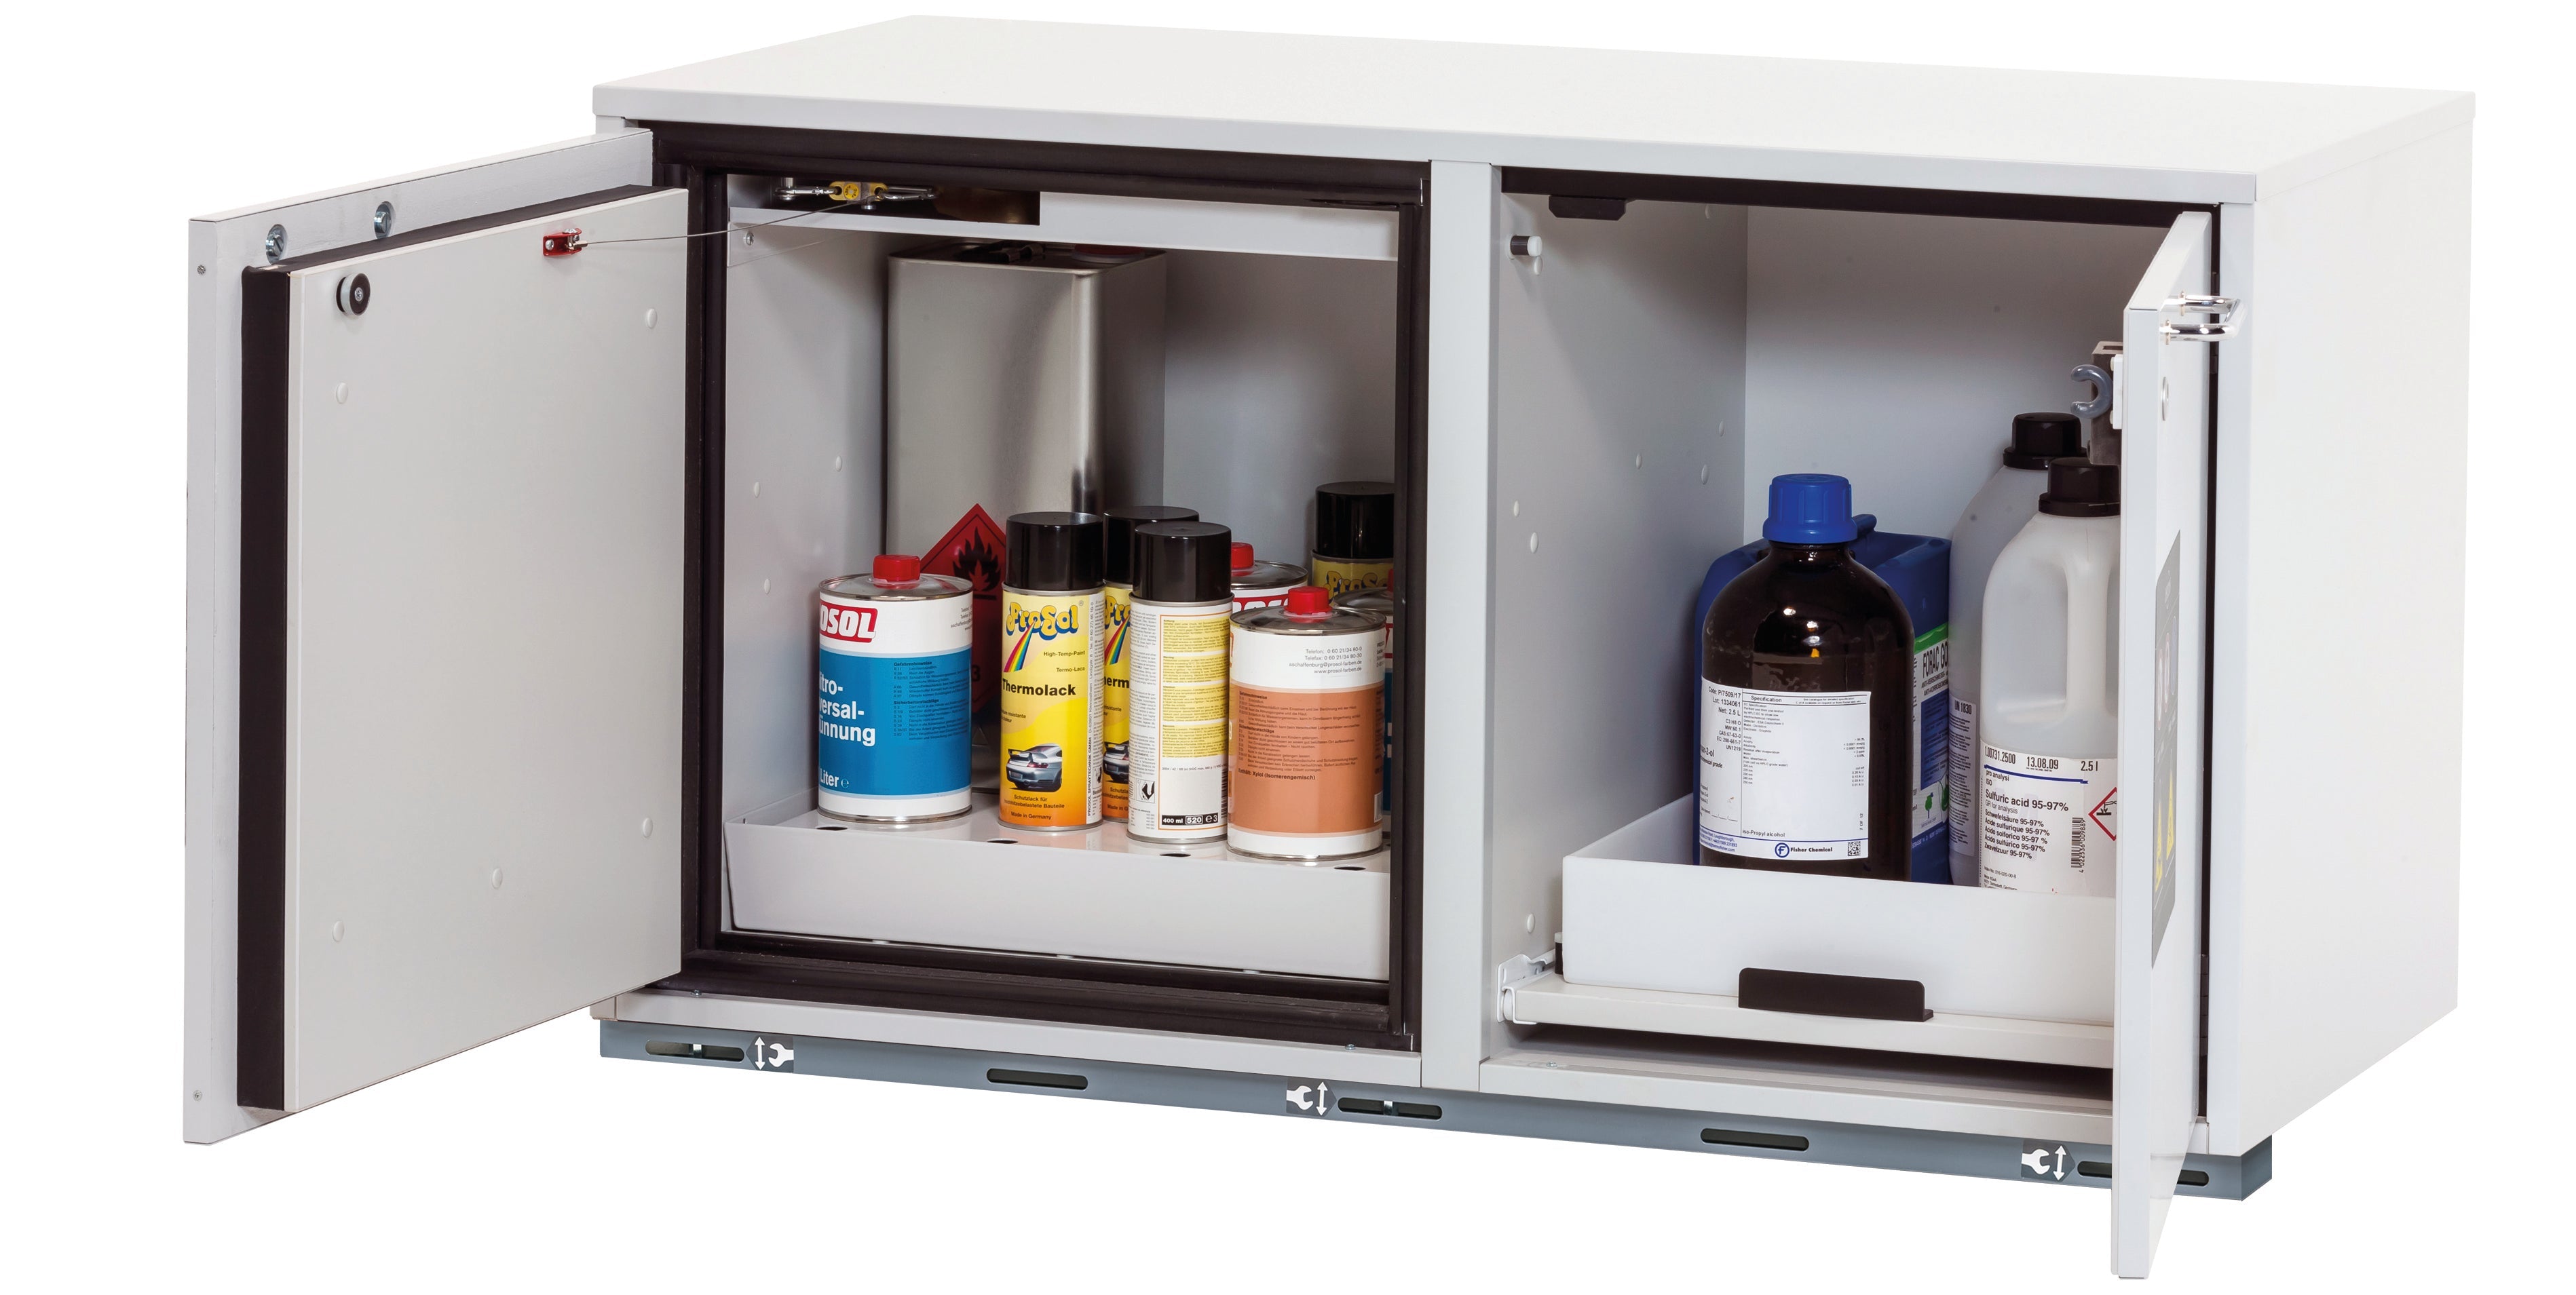 Type 90 combination safety cabinet K-UB-90 model K90.060.110.050.UB.2T in light gray RAL 7035 with 1x perforated plate insert standard (sheet steel)